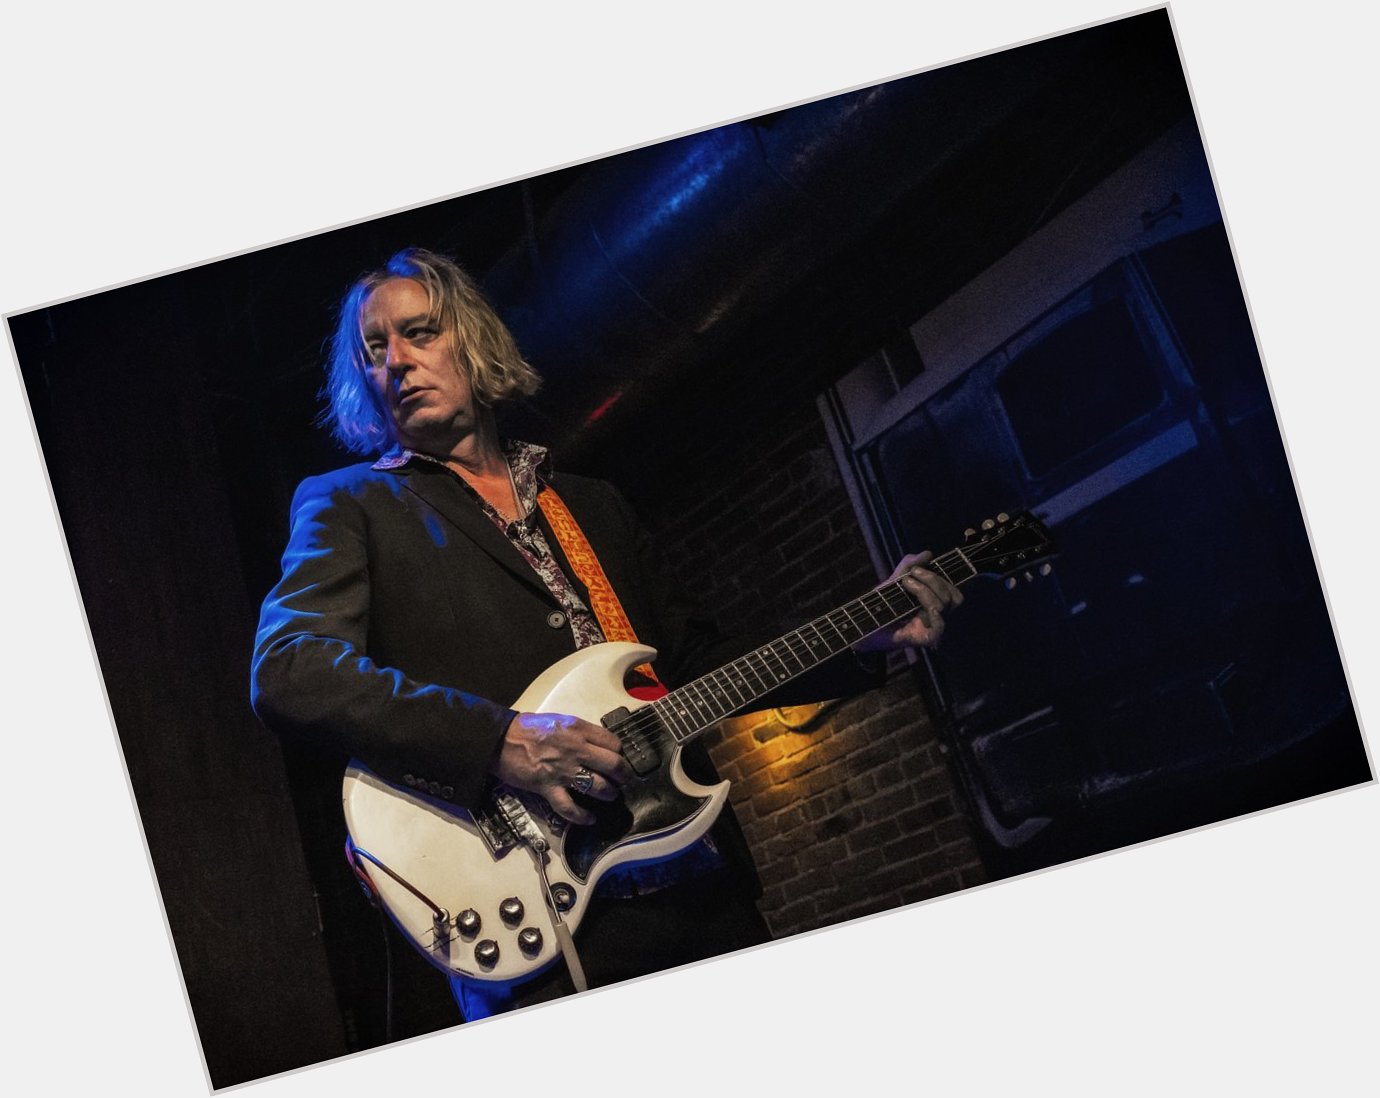 Wishing a very happy birthday to Peter Buck of R.E.M. Rock on Peter!   